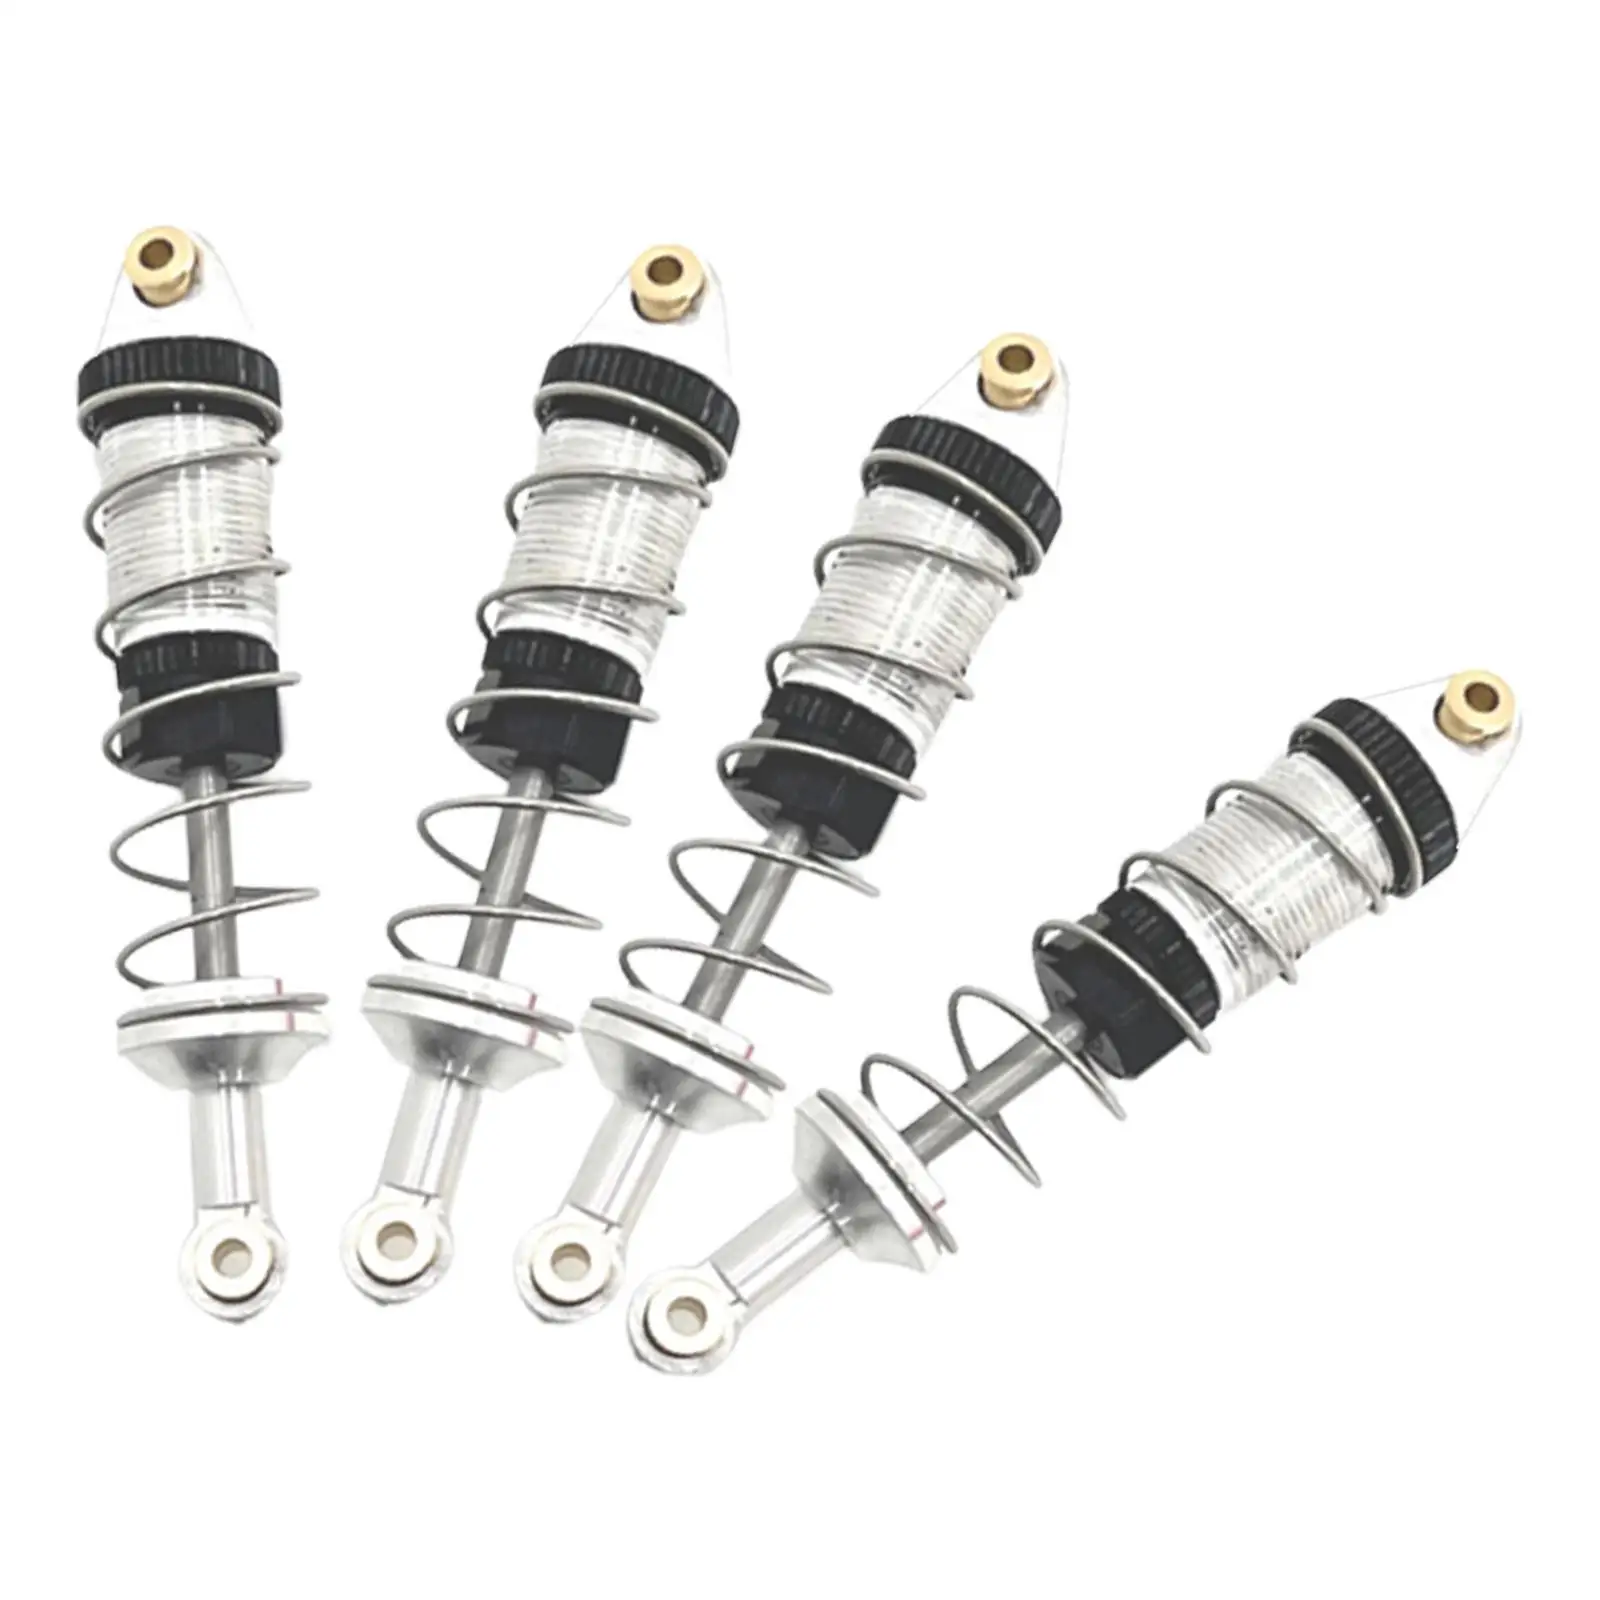 4x RC Shock Absorber Front and Rear RC Shocks Damper 1/16 Scale Spare Parts for 16207 16209 Model RC Hobby Car Trucks